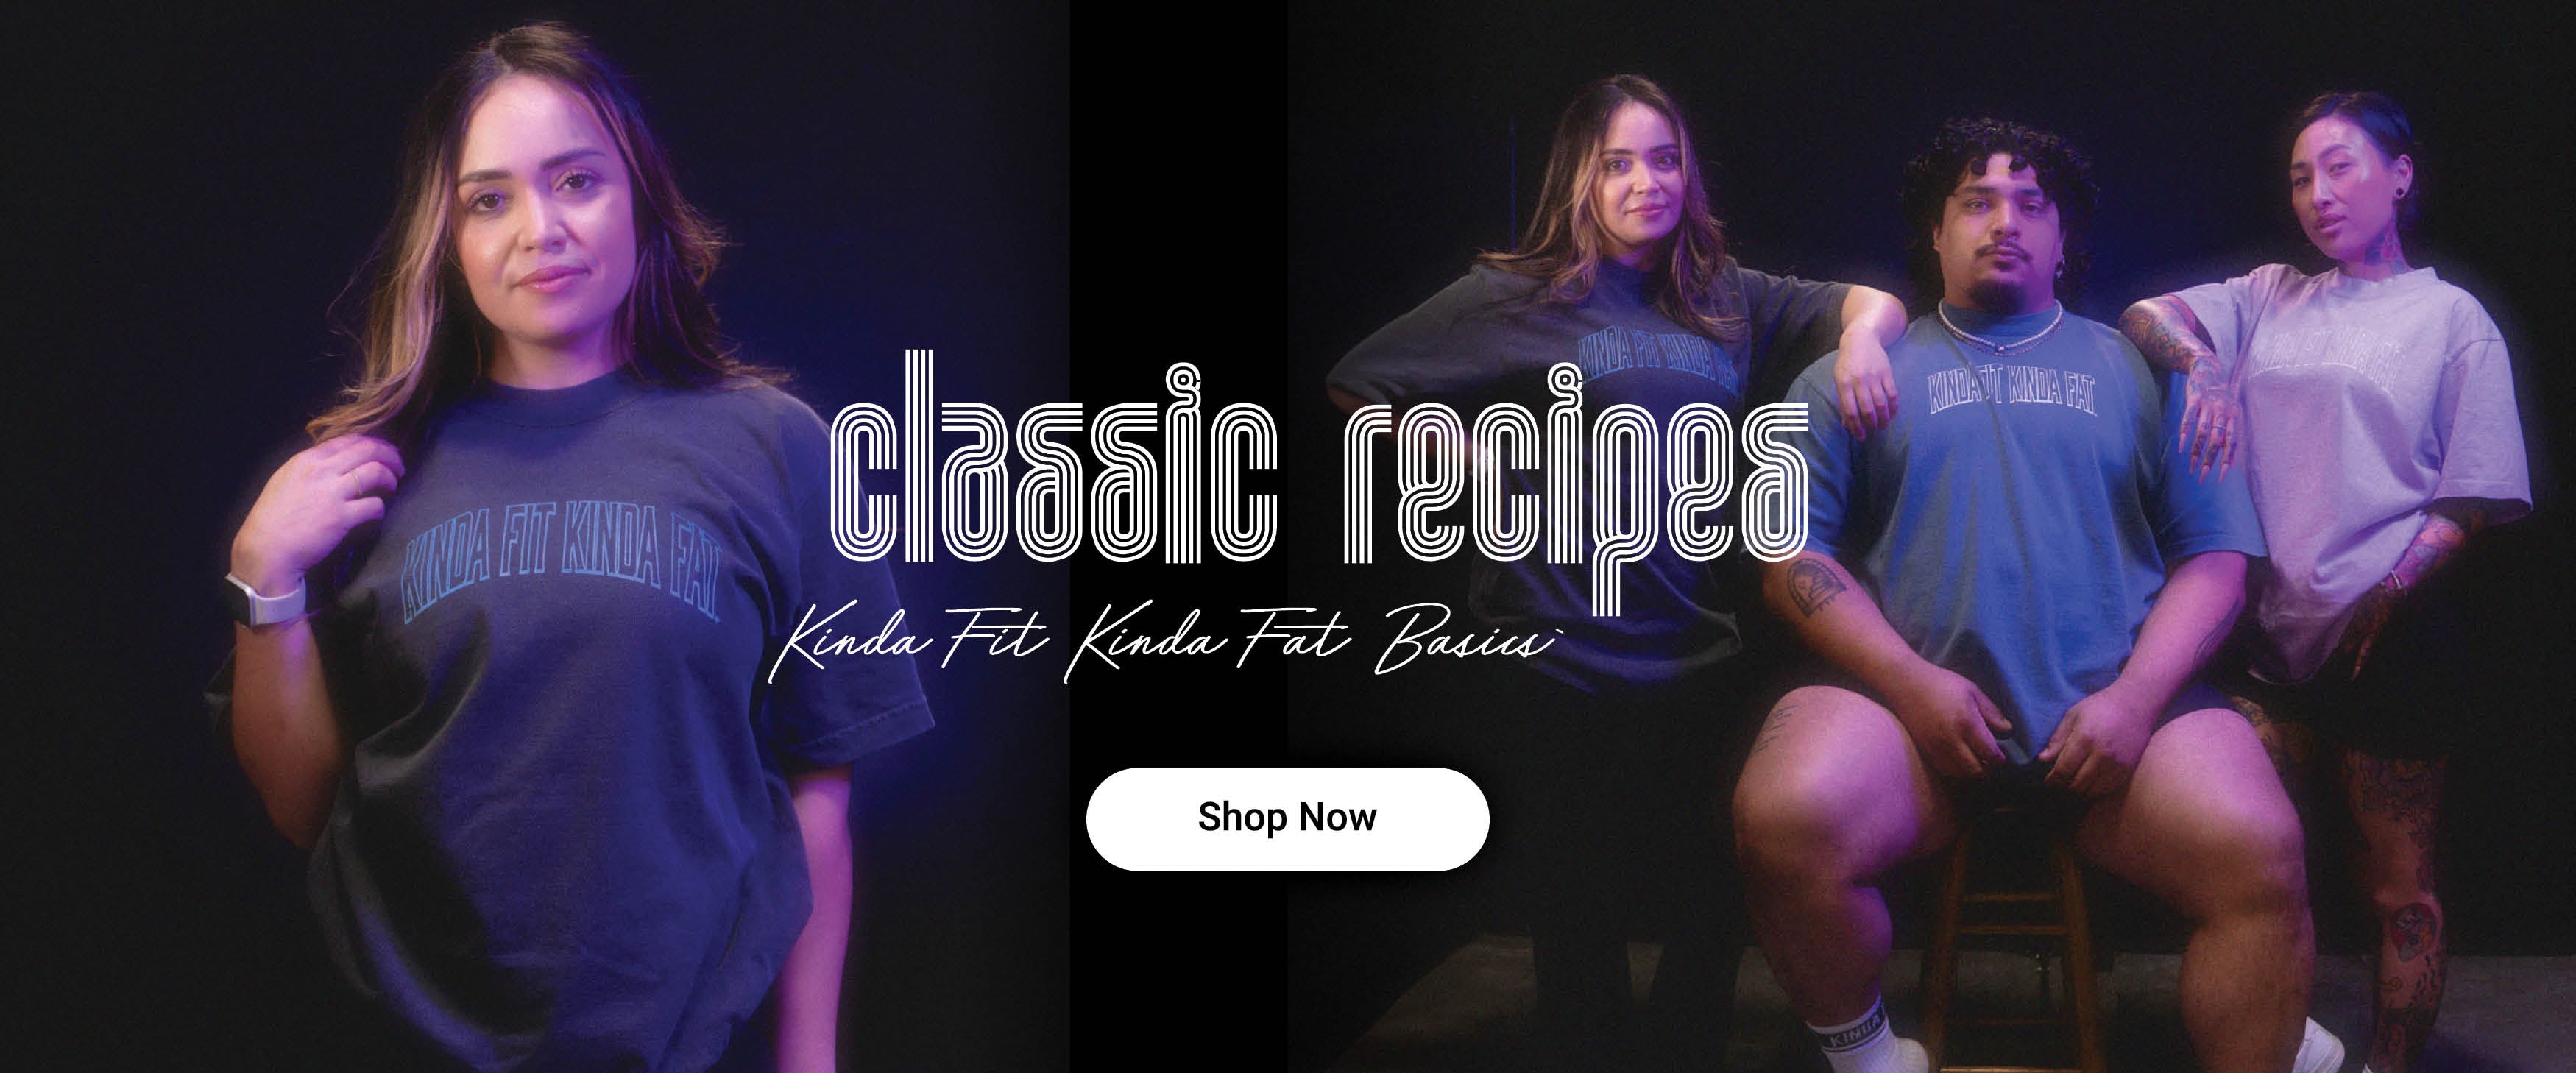 classic recipes ranging from our basics to basic accessories